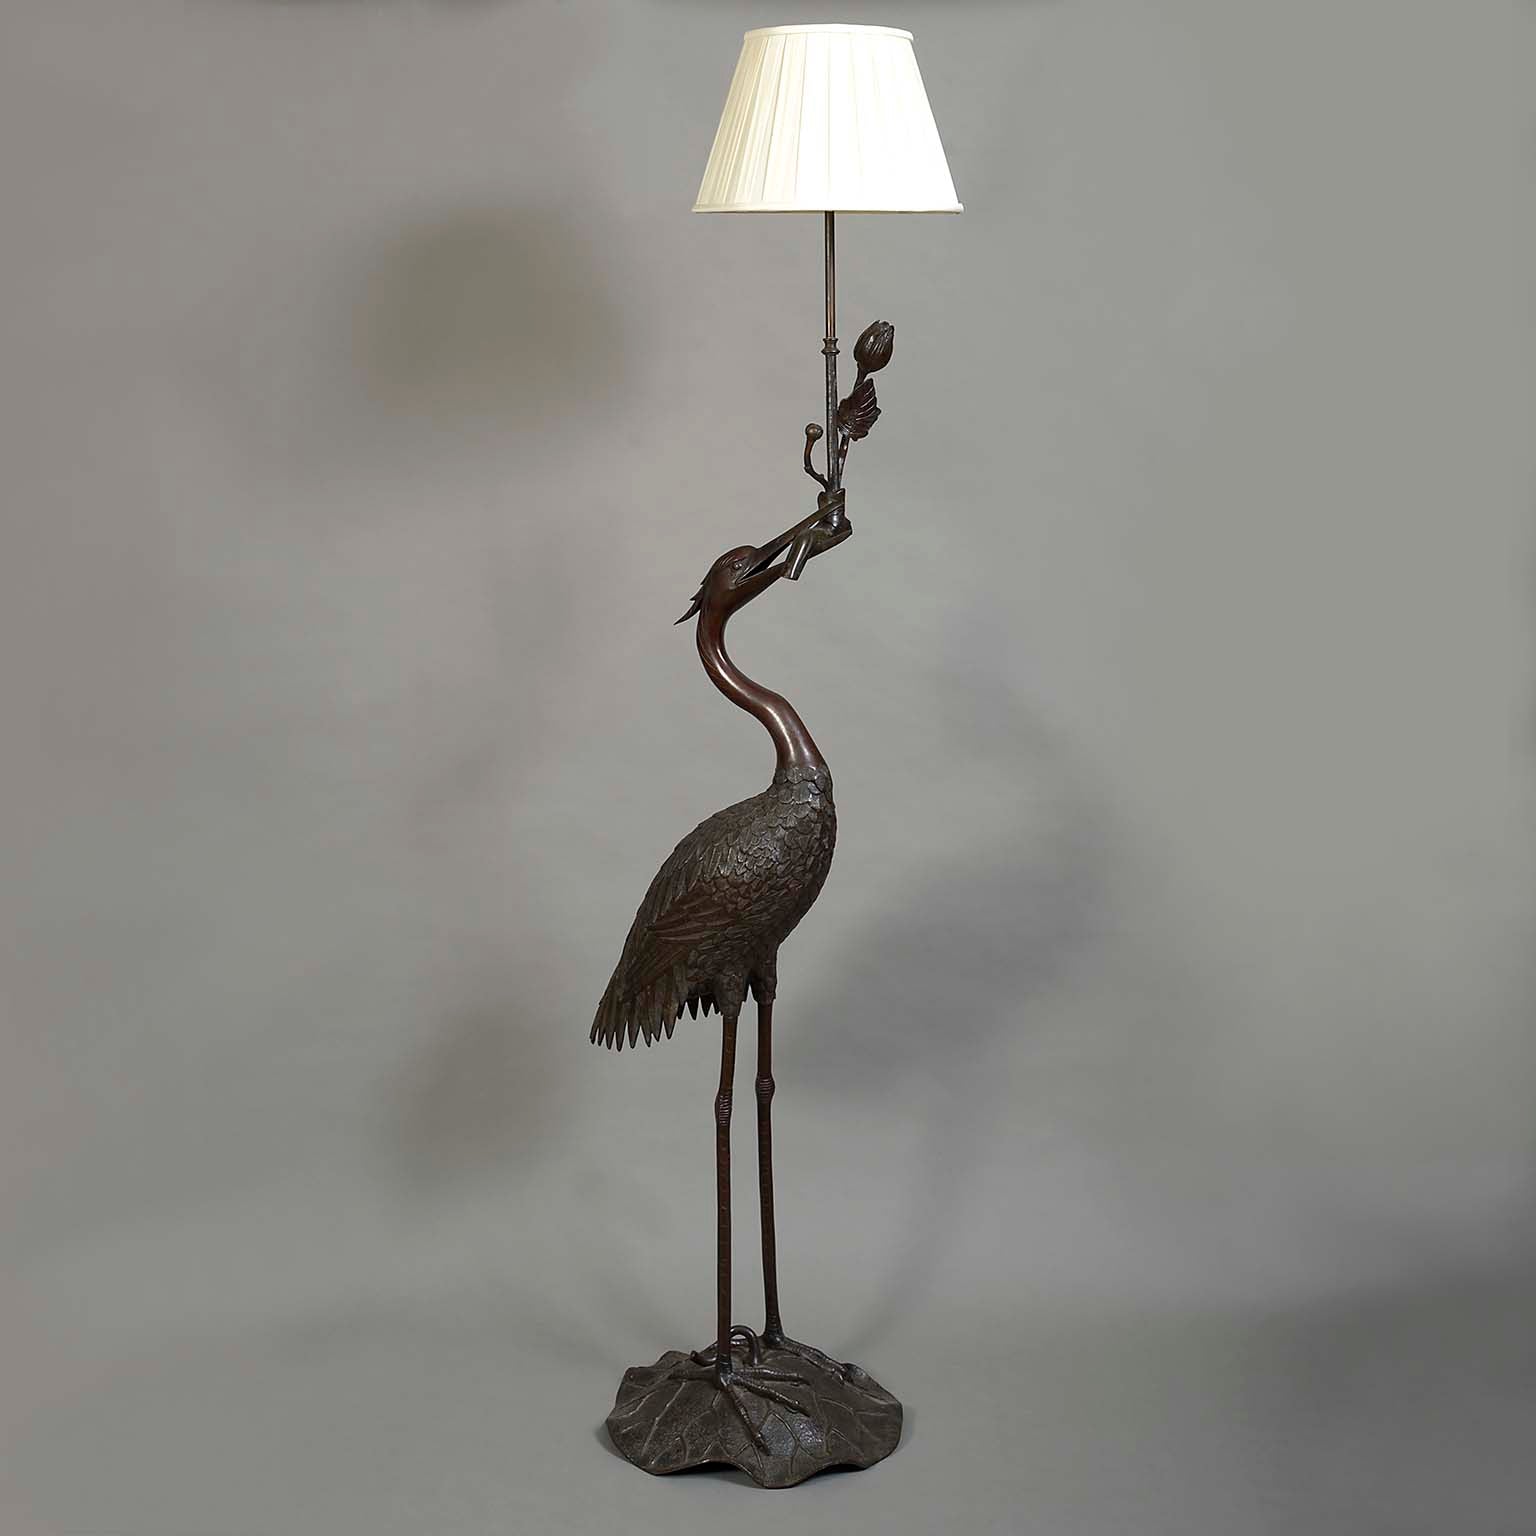 Bronze Standing Lamp in the form of a Crane